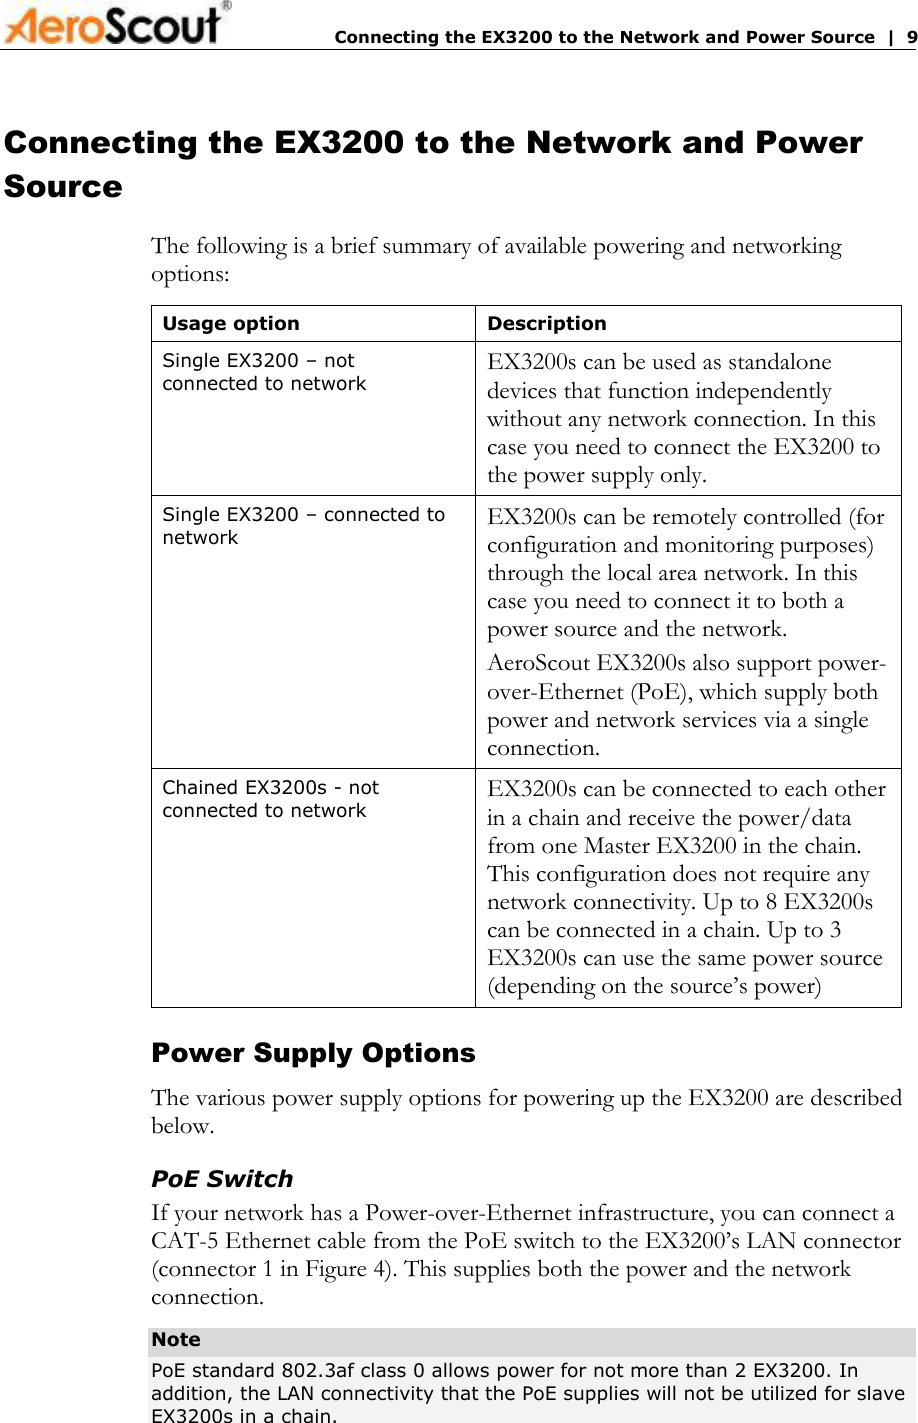       Connecting the EX3200 to the Network and Power Source  |  9 Connecting the EX3200 to the Network and Power Source The following is a brief summary of available powering and networking options: Usage option  Description Single EX3200 – not connected to network  EX3200s can be used as standalone devices that function independently without any network connection. In this case you need to connect the EX3200 to the power supply only. Single EX3200 – connected to network  EX3200s can be remotely controlled (for configuration and monitoring purposes) through the local area network. In this case you need to connect it to both a power source and the network.  AeroScout EX3200s also support power-over-Ethernet (PoE), which supply both power and network services via a single connection. Chained EX3200s - not connected to network  EX3200s can be connected to each other in a chain and receive the power/data from one Master EX3200 in the chain. This configuration does not require any network connectivity. Up to 8 EX3200s can be connected in a chain. Up to 3 EX3200s can use the same power source (depending on the source’s power) Power Supply Options The various power supply options for powering up the EX3200 are described below. PoE Switch If your network has a Power-over-Ethernet infrastructure, you can connect a CAT-5 Ethernet cable from the PoE switch to the EX3200’s LAN connector (connector 1 in Figure 4). This supplies both the power and the network connection.  Note PoE standard 802.3af class 0 allows power for not more than 2 EX3200. In addition, the LAN connectivity that the PoE supplies will not be utilized for slave EX3200s in a chain. 